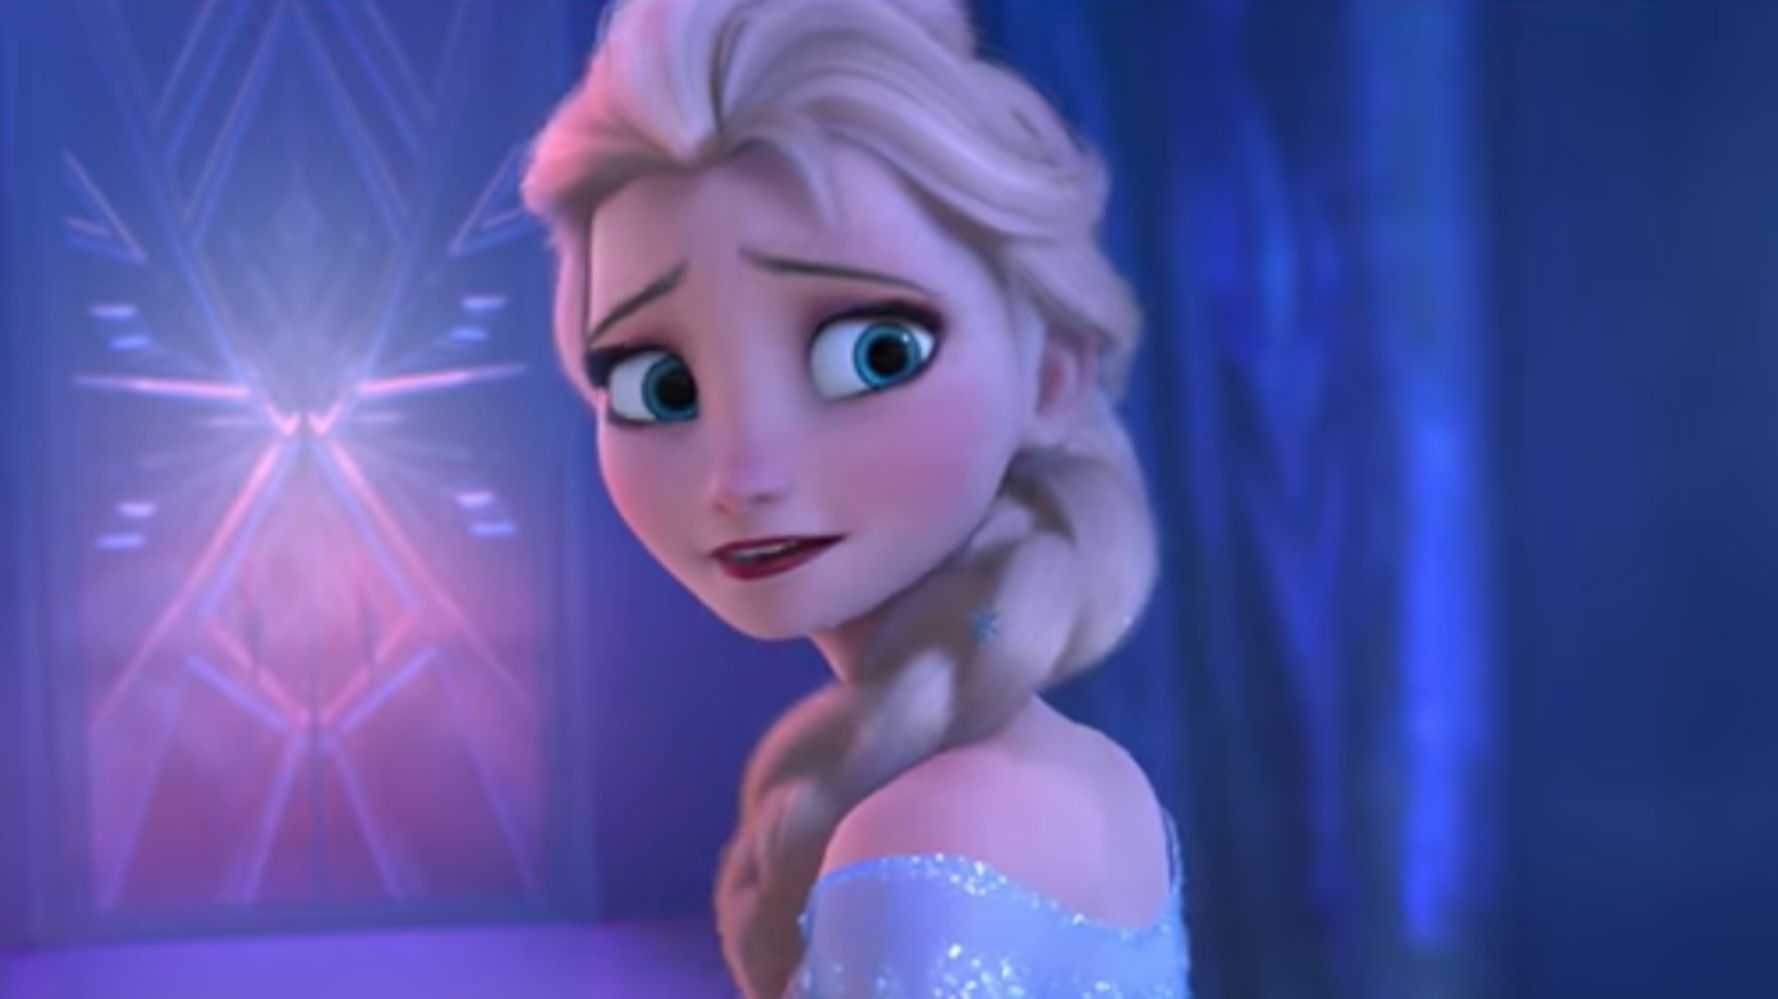 Backlash Grows Over Campaign to Make Elsa From 'Frozen' a Lesbian